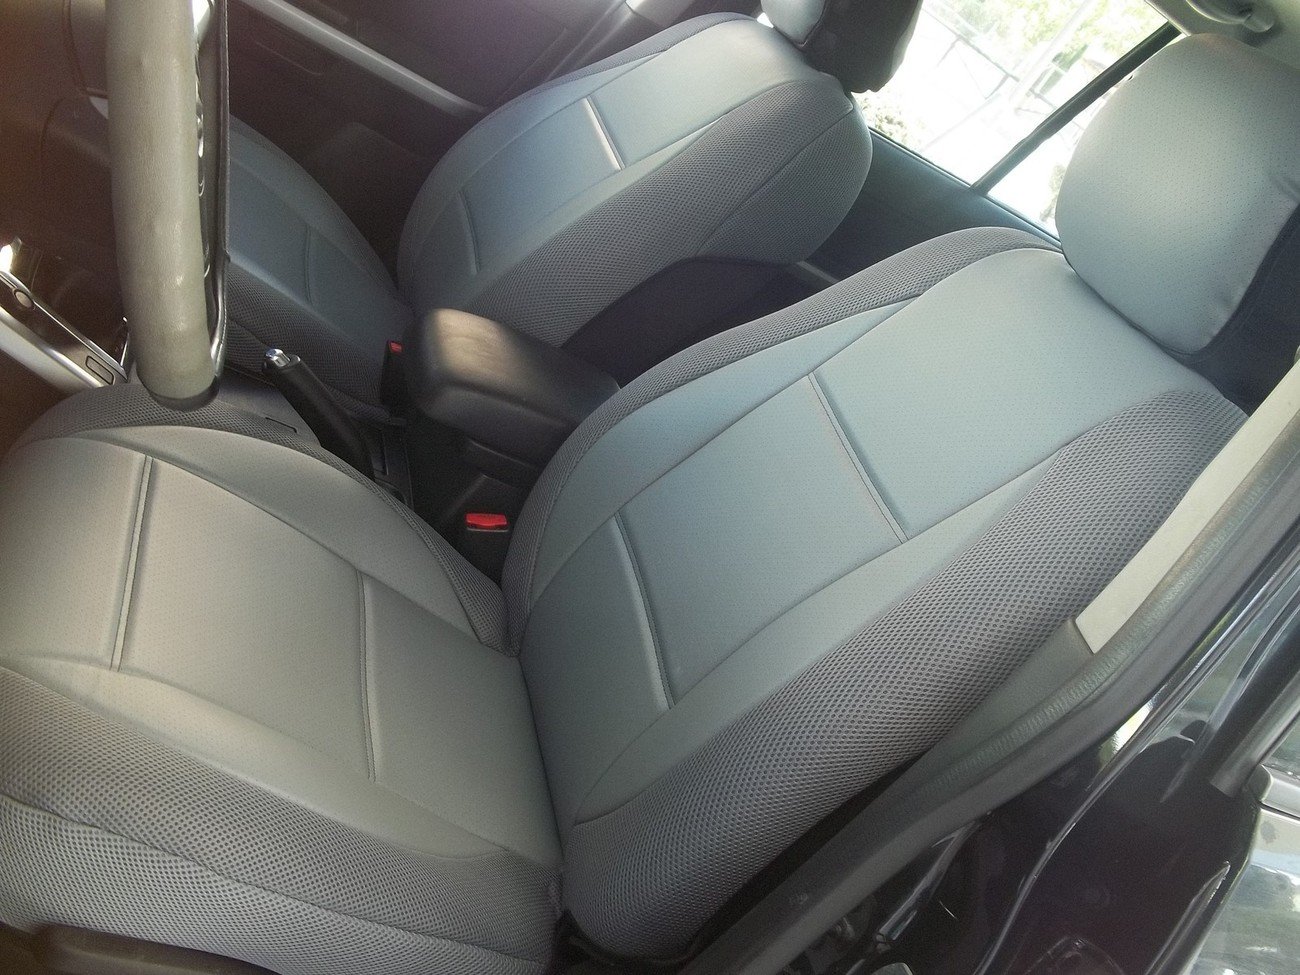 Ford ranger 2012 leather seat covers #9